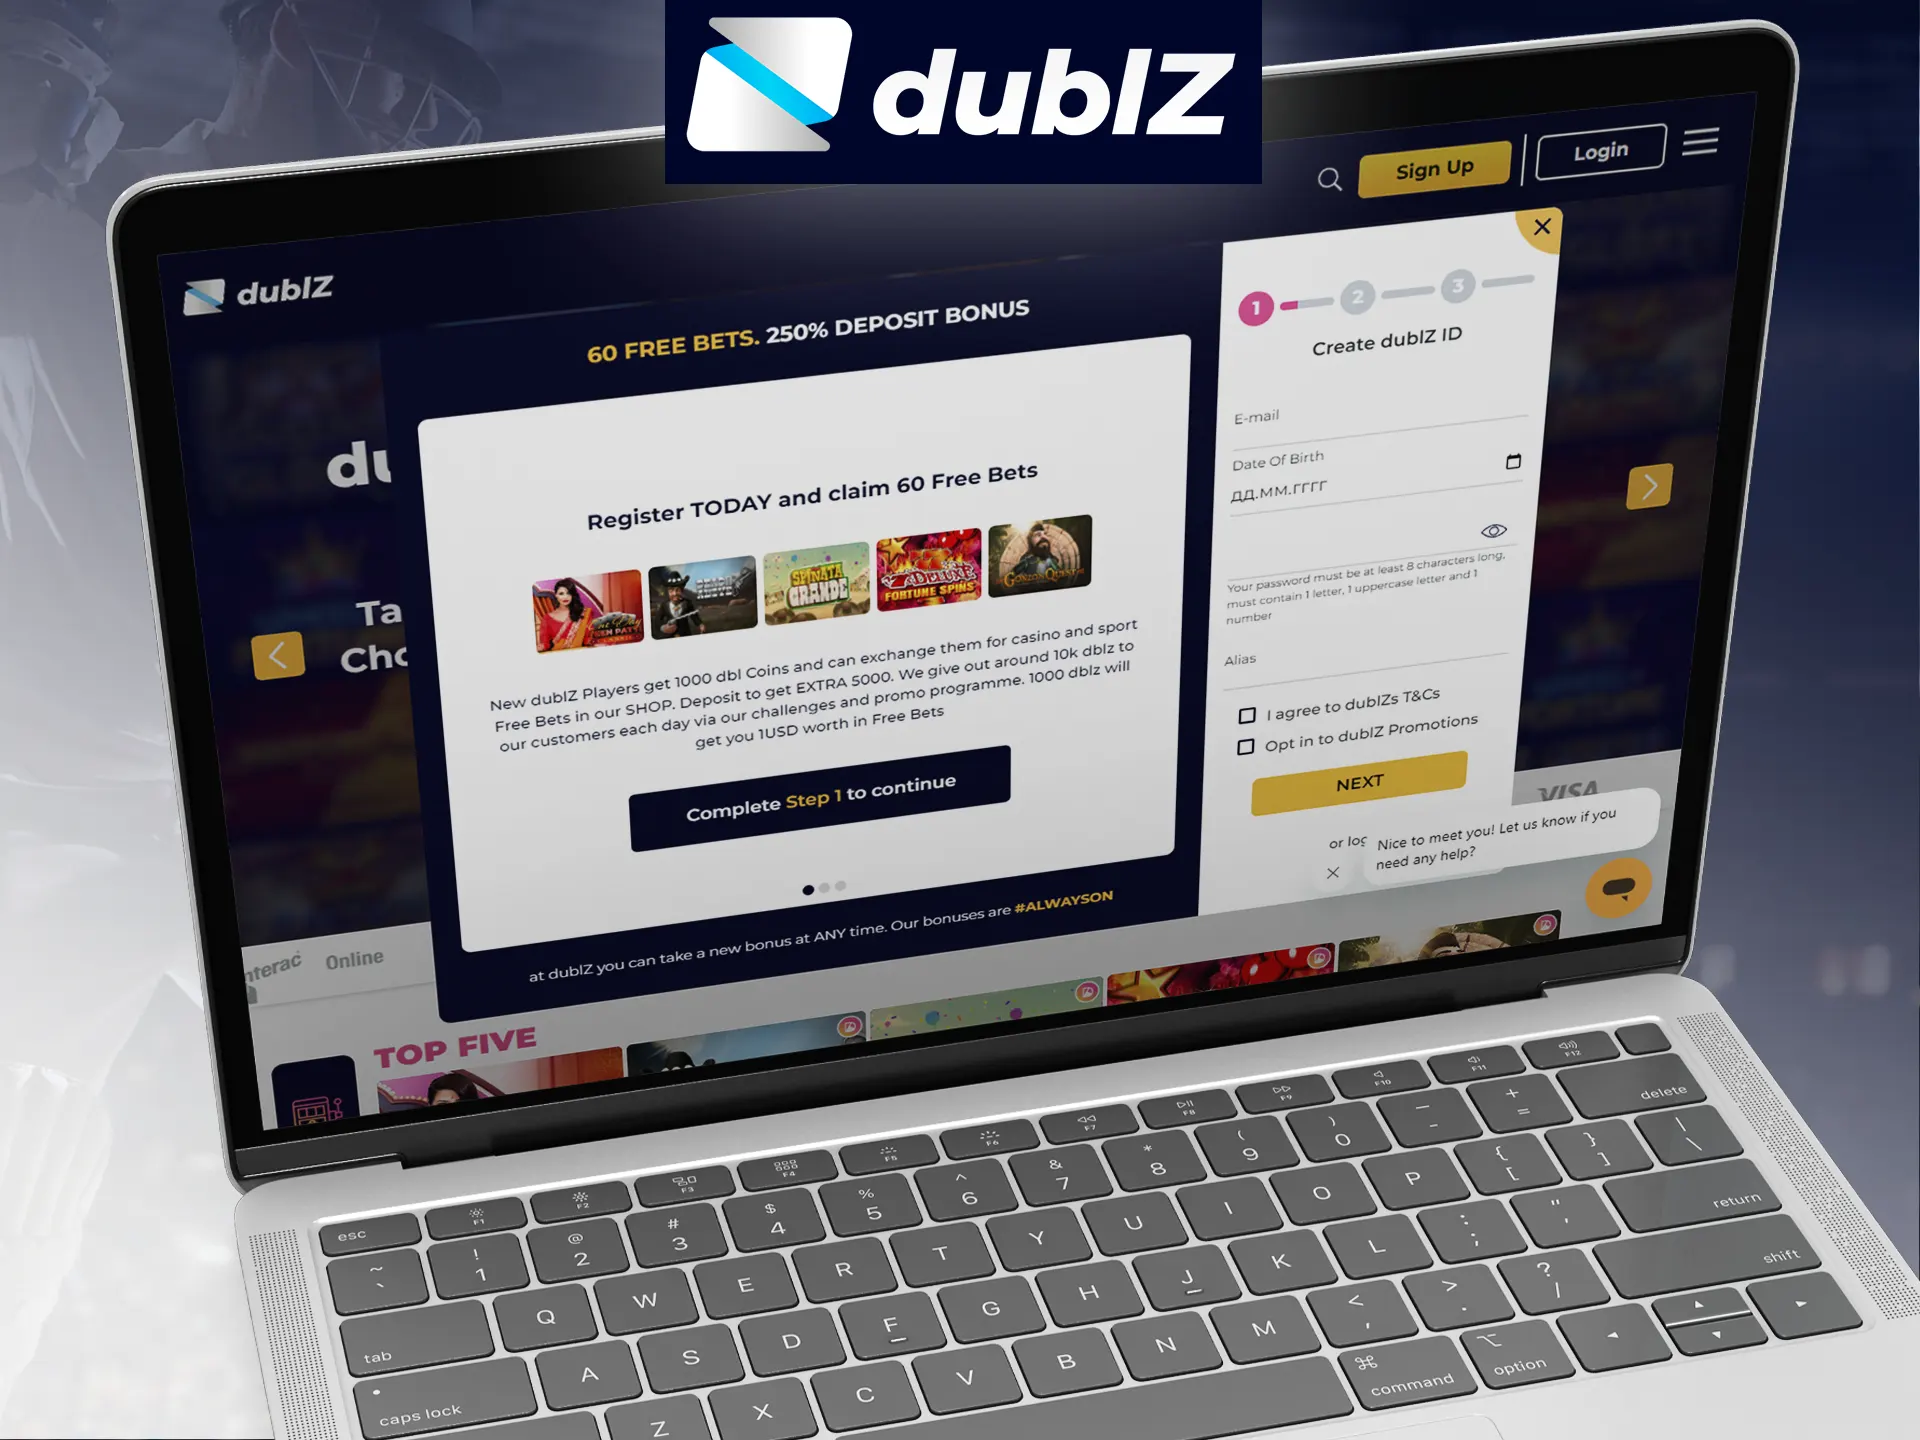 Go through a simple and quick registration on Dublz.